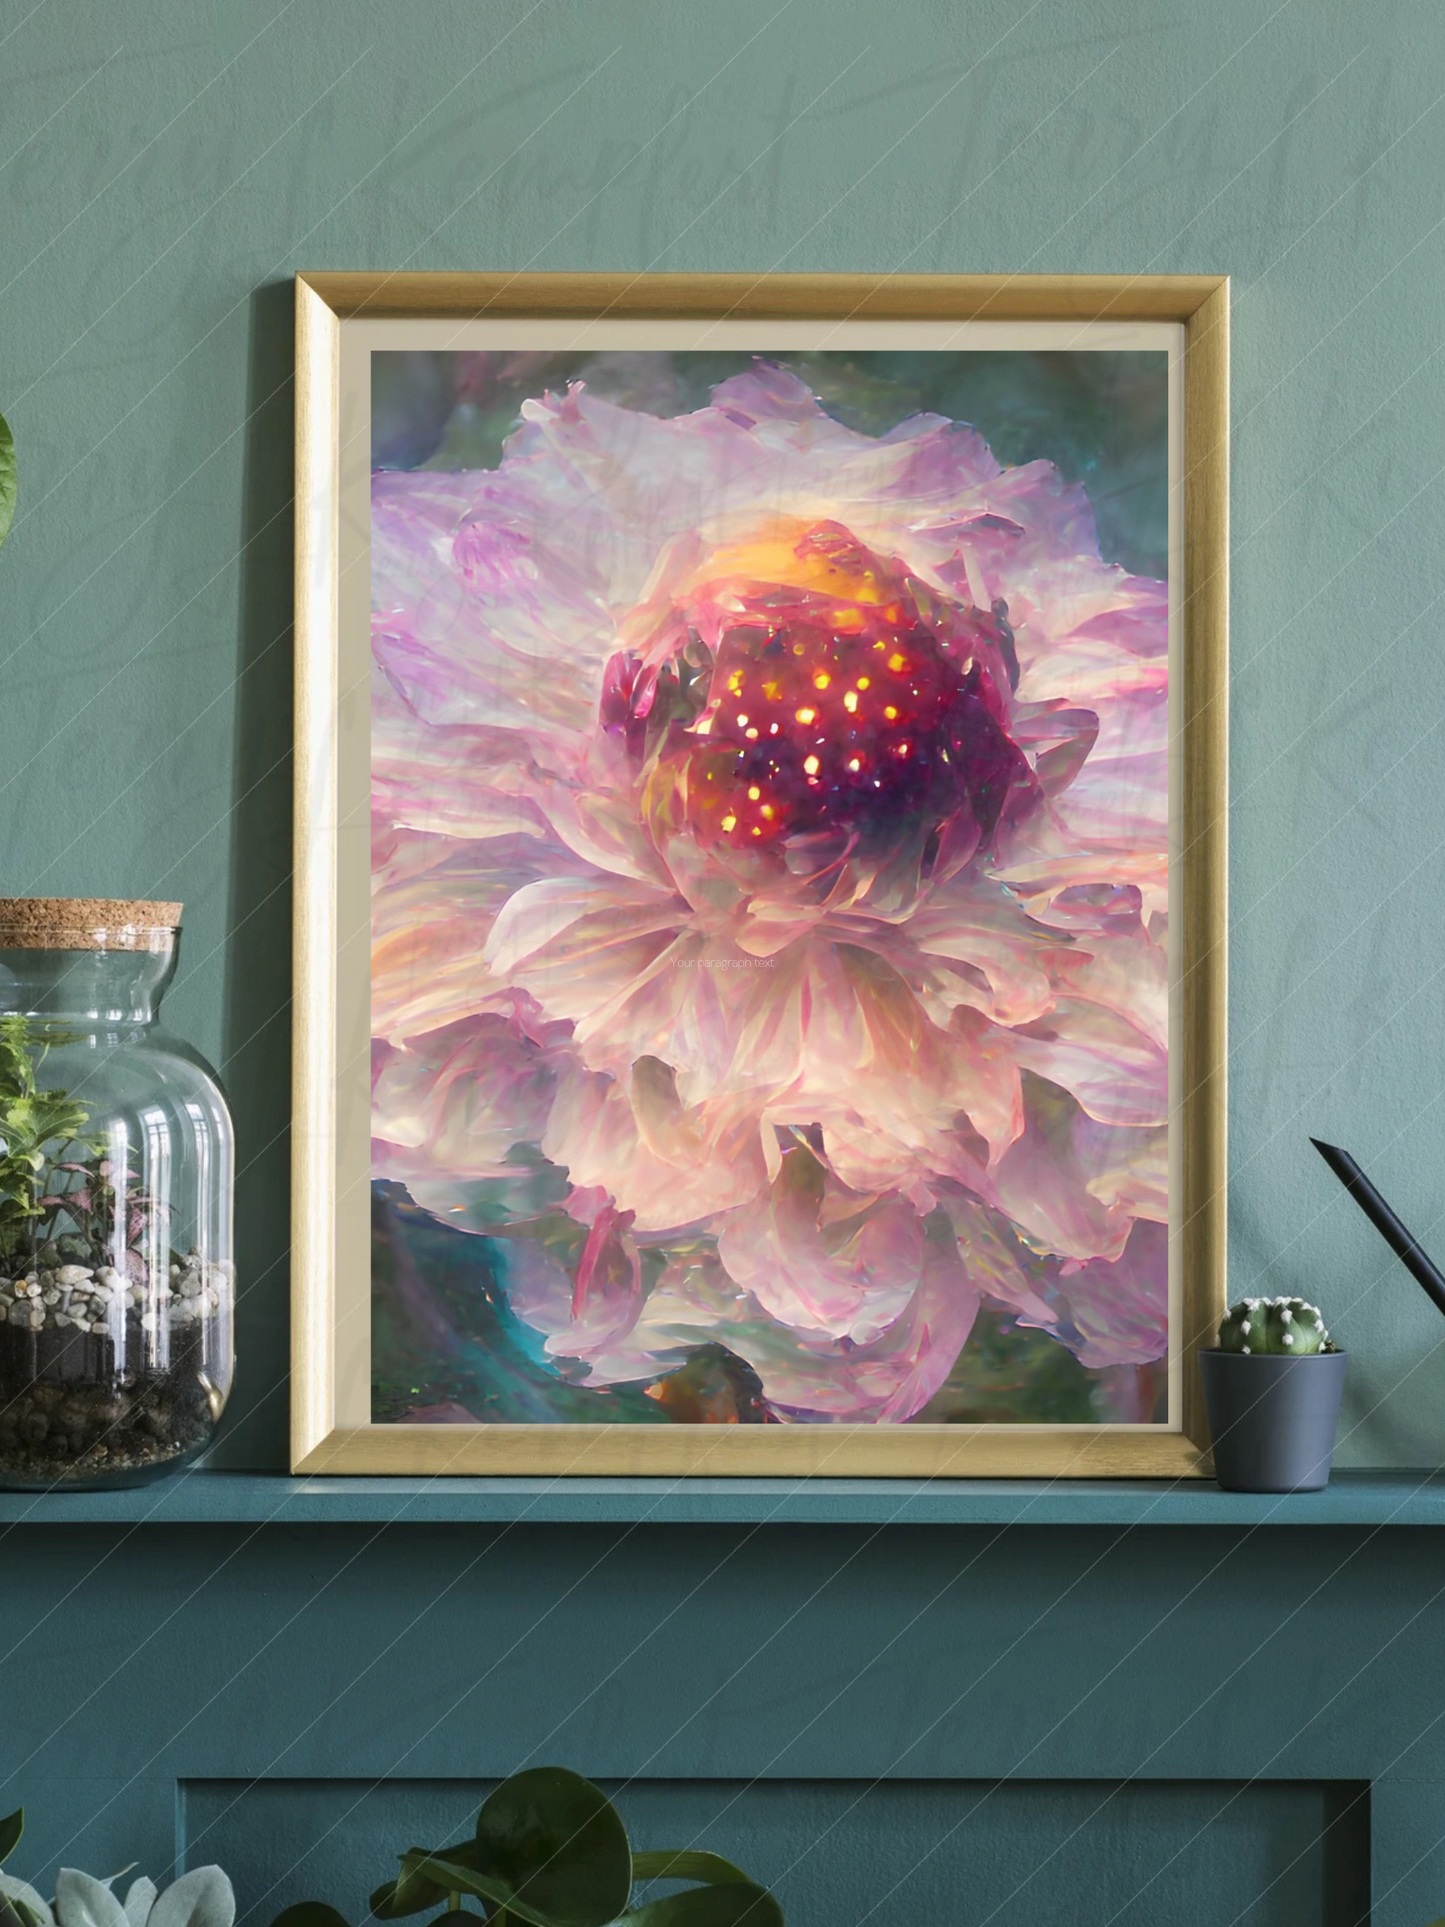 Dahlia with Embers Canvas - Impressionistic painting - Fine Art print ready to frame, Gallery Wrapped Canvas - multiple size options